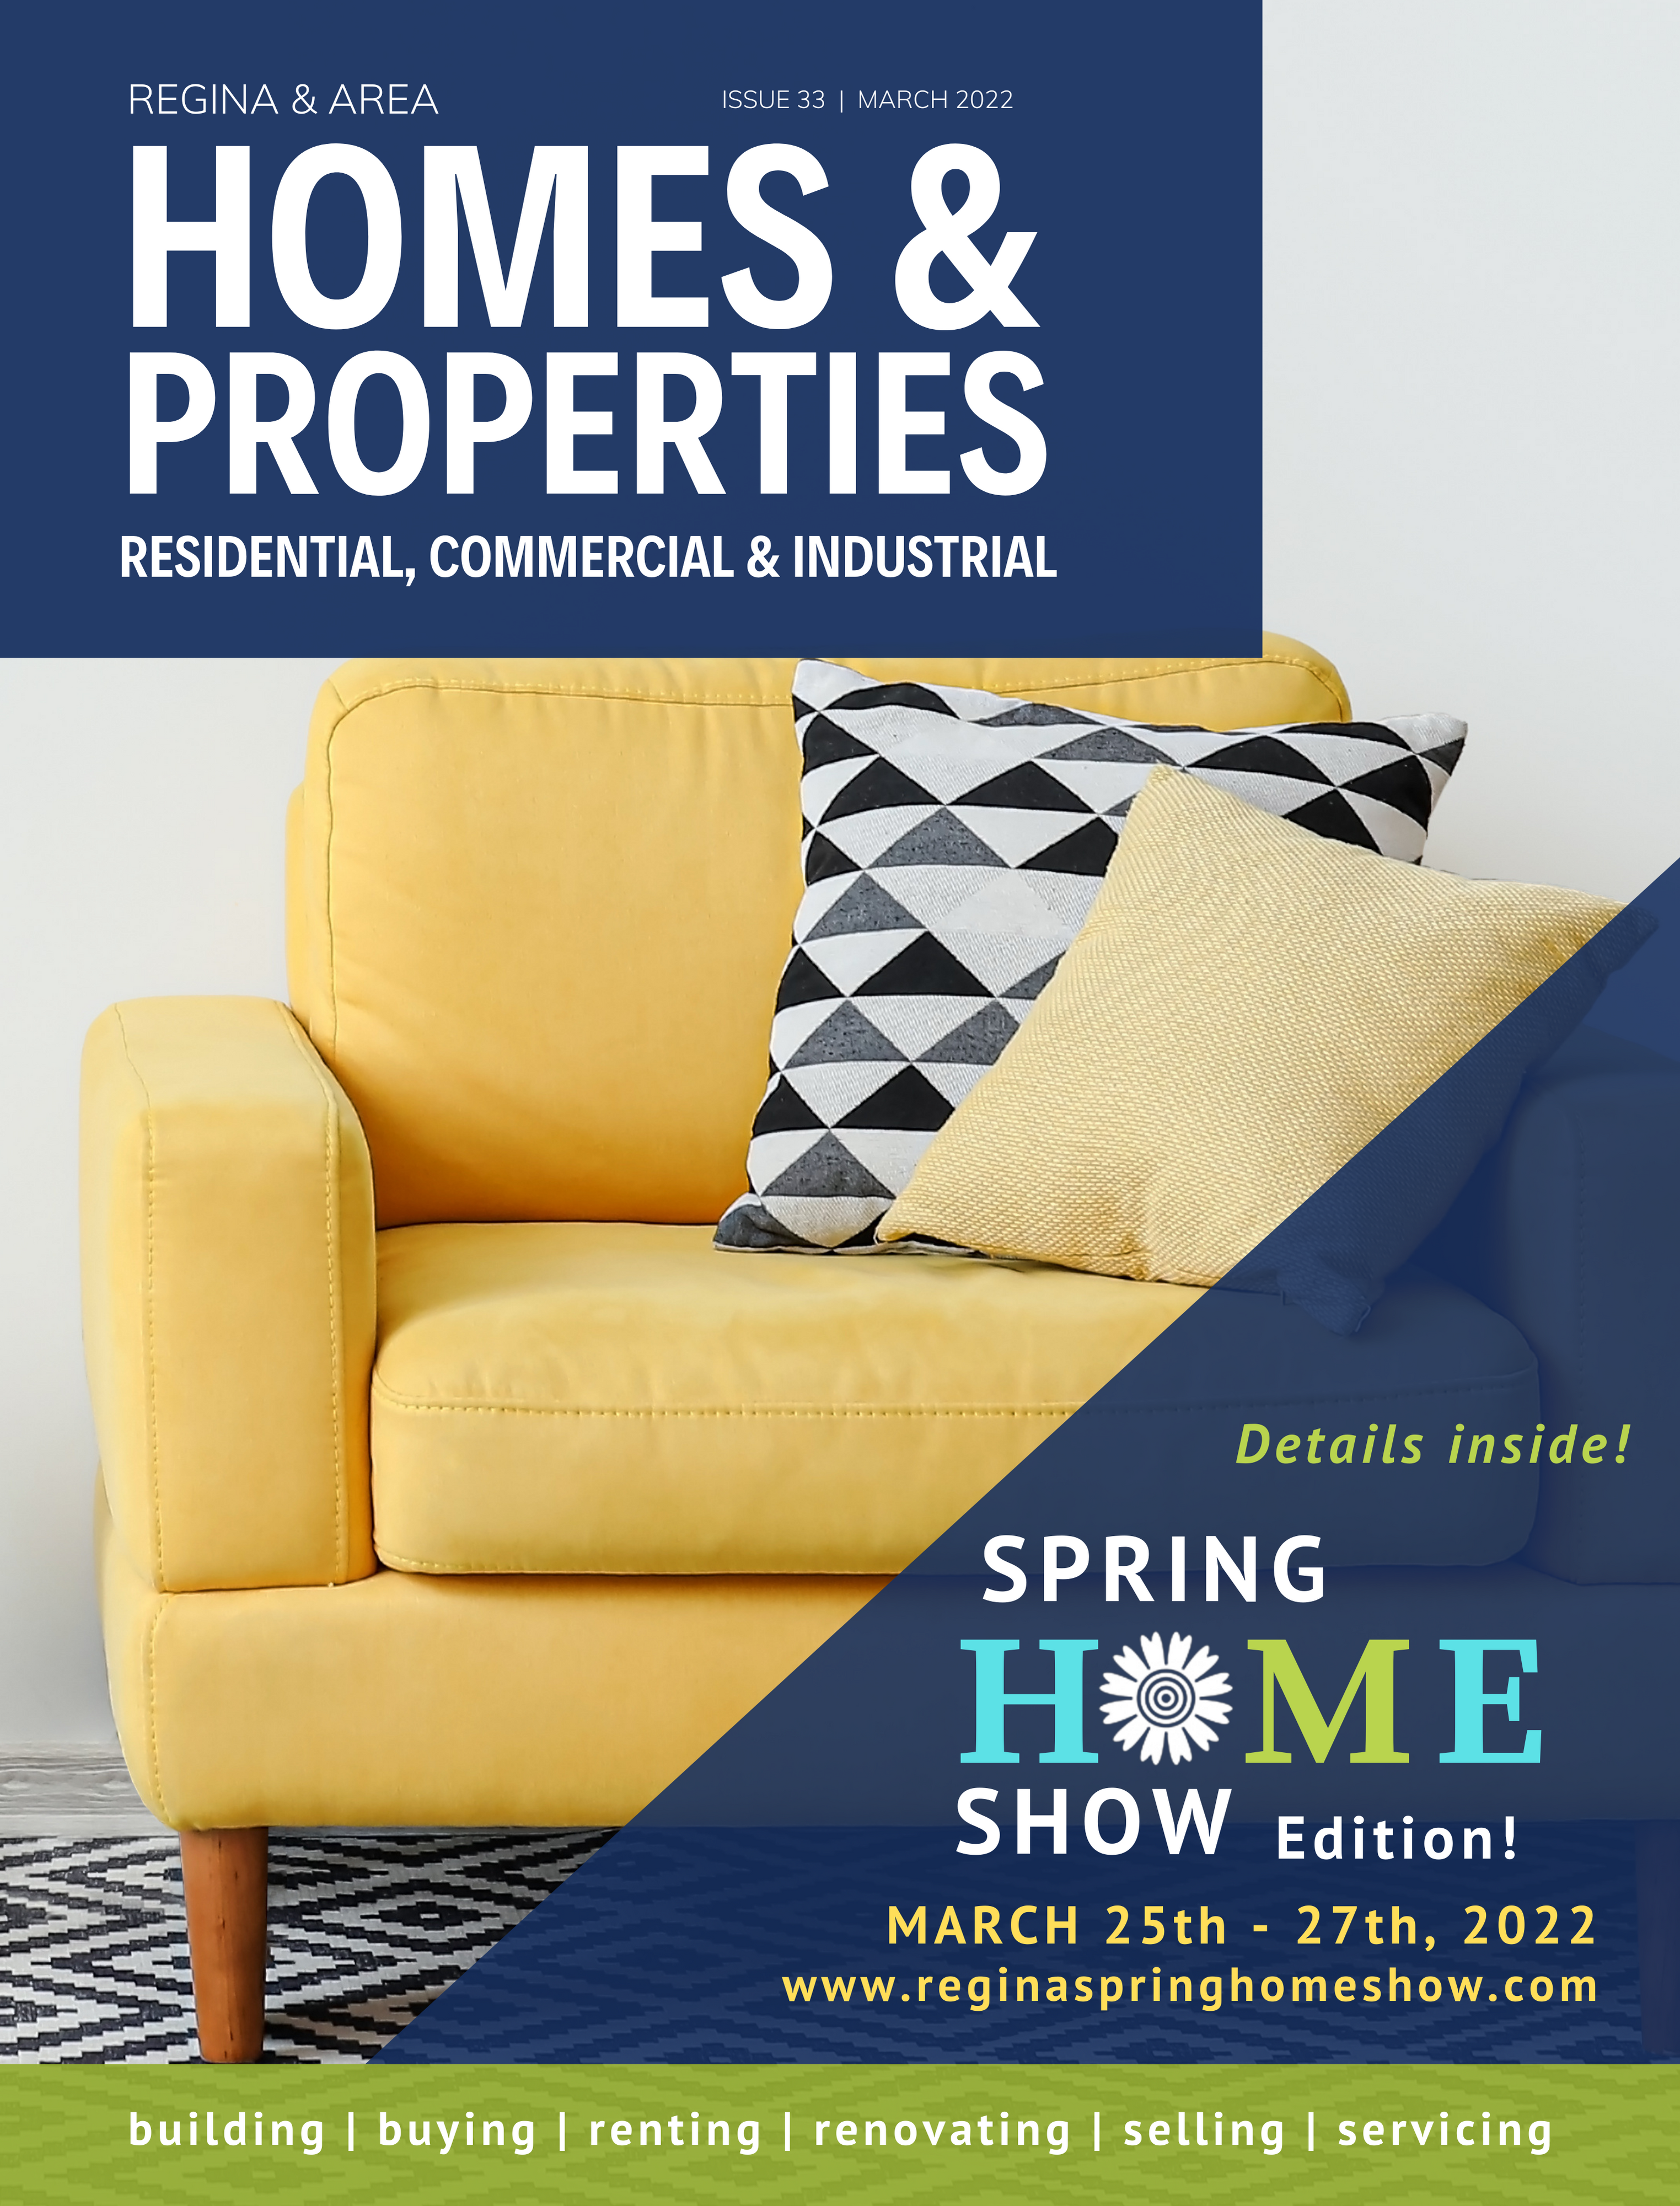 Homes & Properties March Issue - Regina Spring Home Show! - Image 1